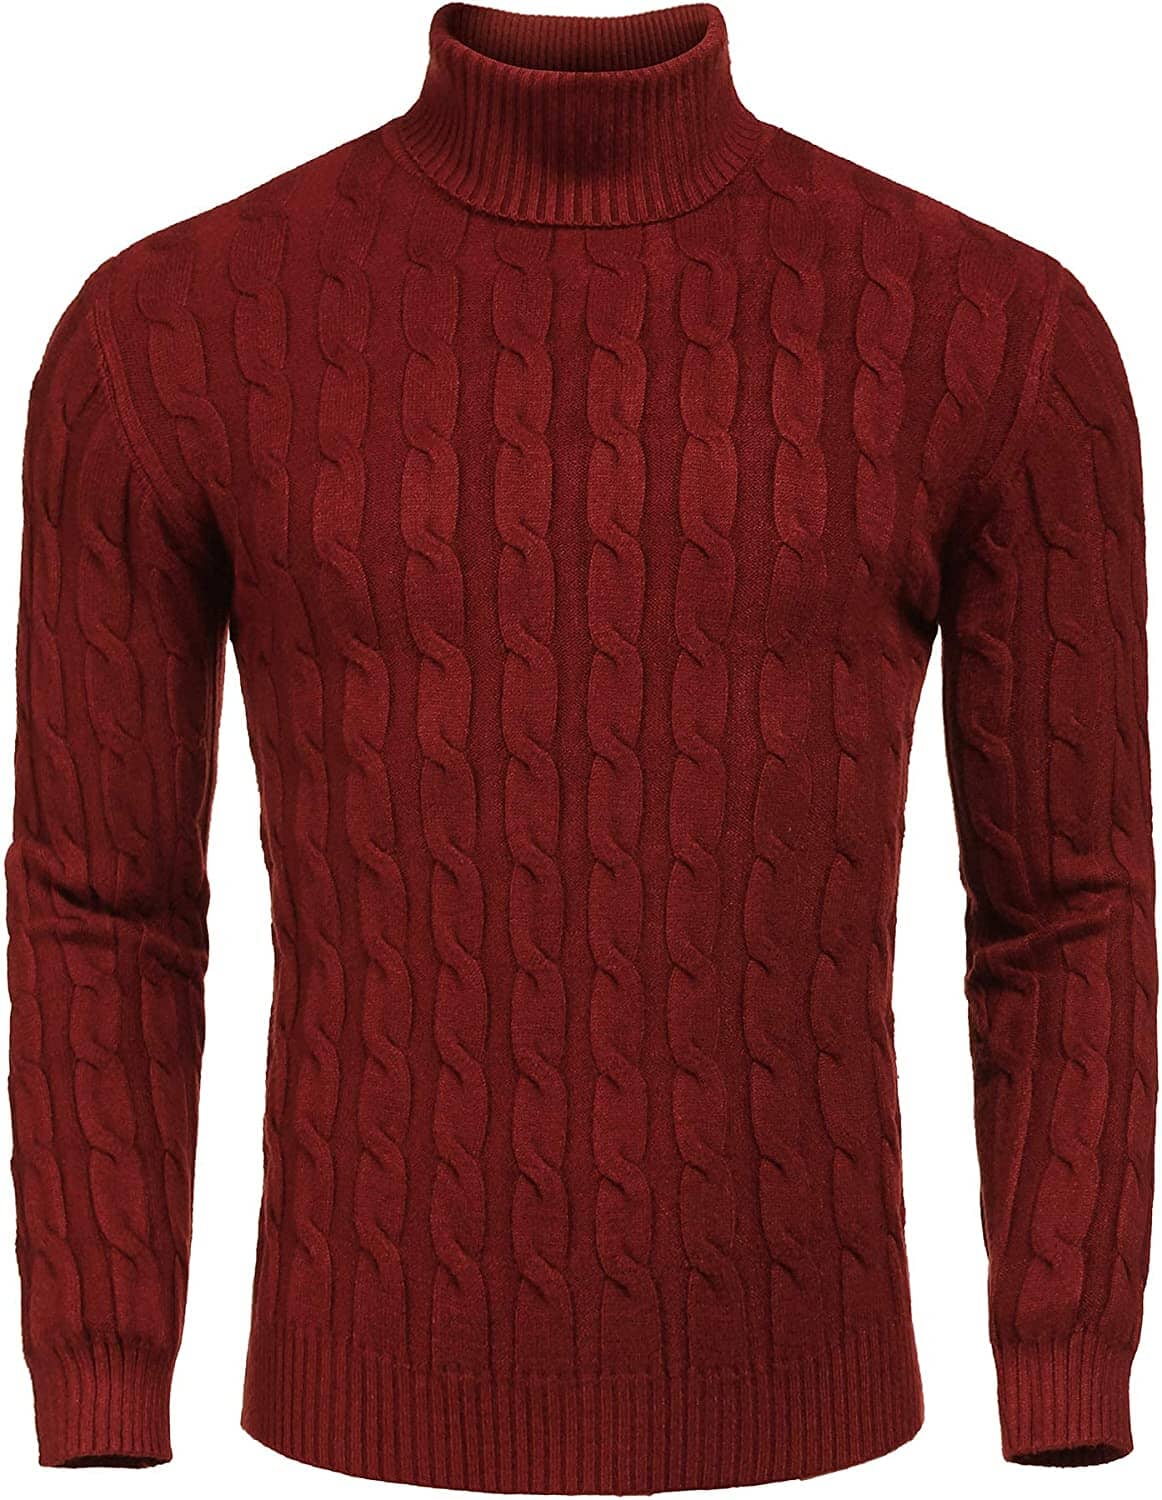 Slim Fit Turtleneck Twisted Knitted Pullover Sweater (US Only) Sweaters COOFANDY Store Wine Red XS 